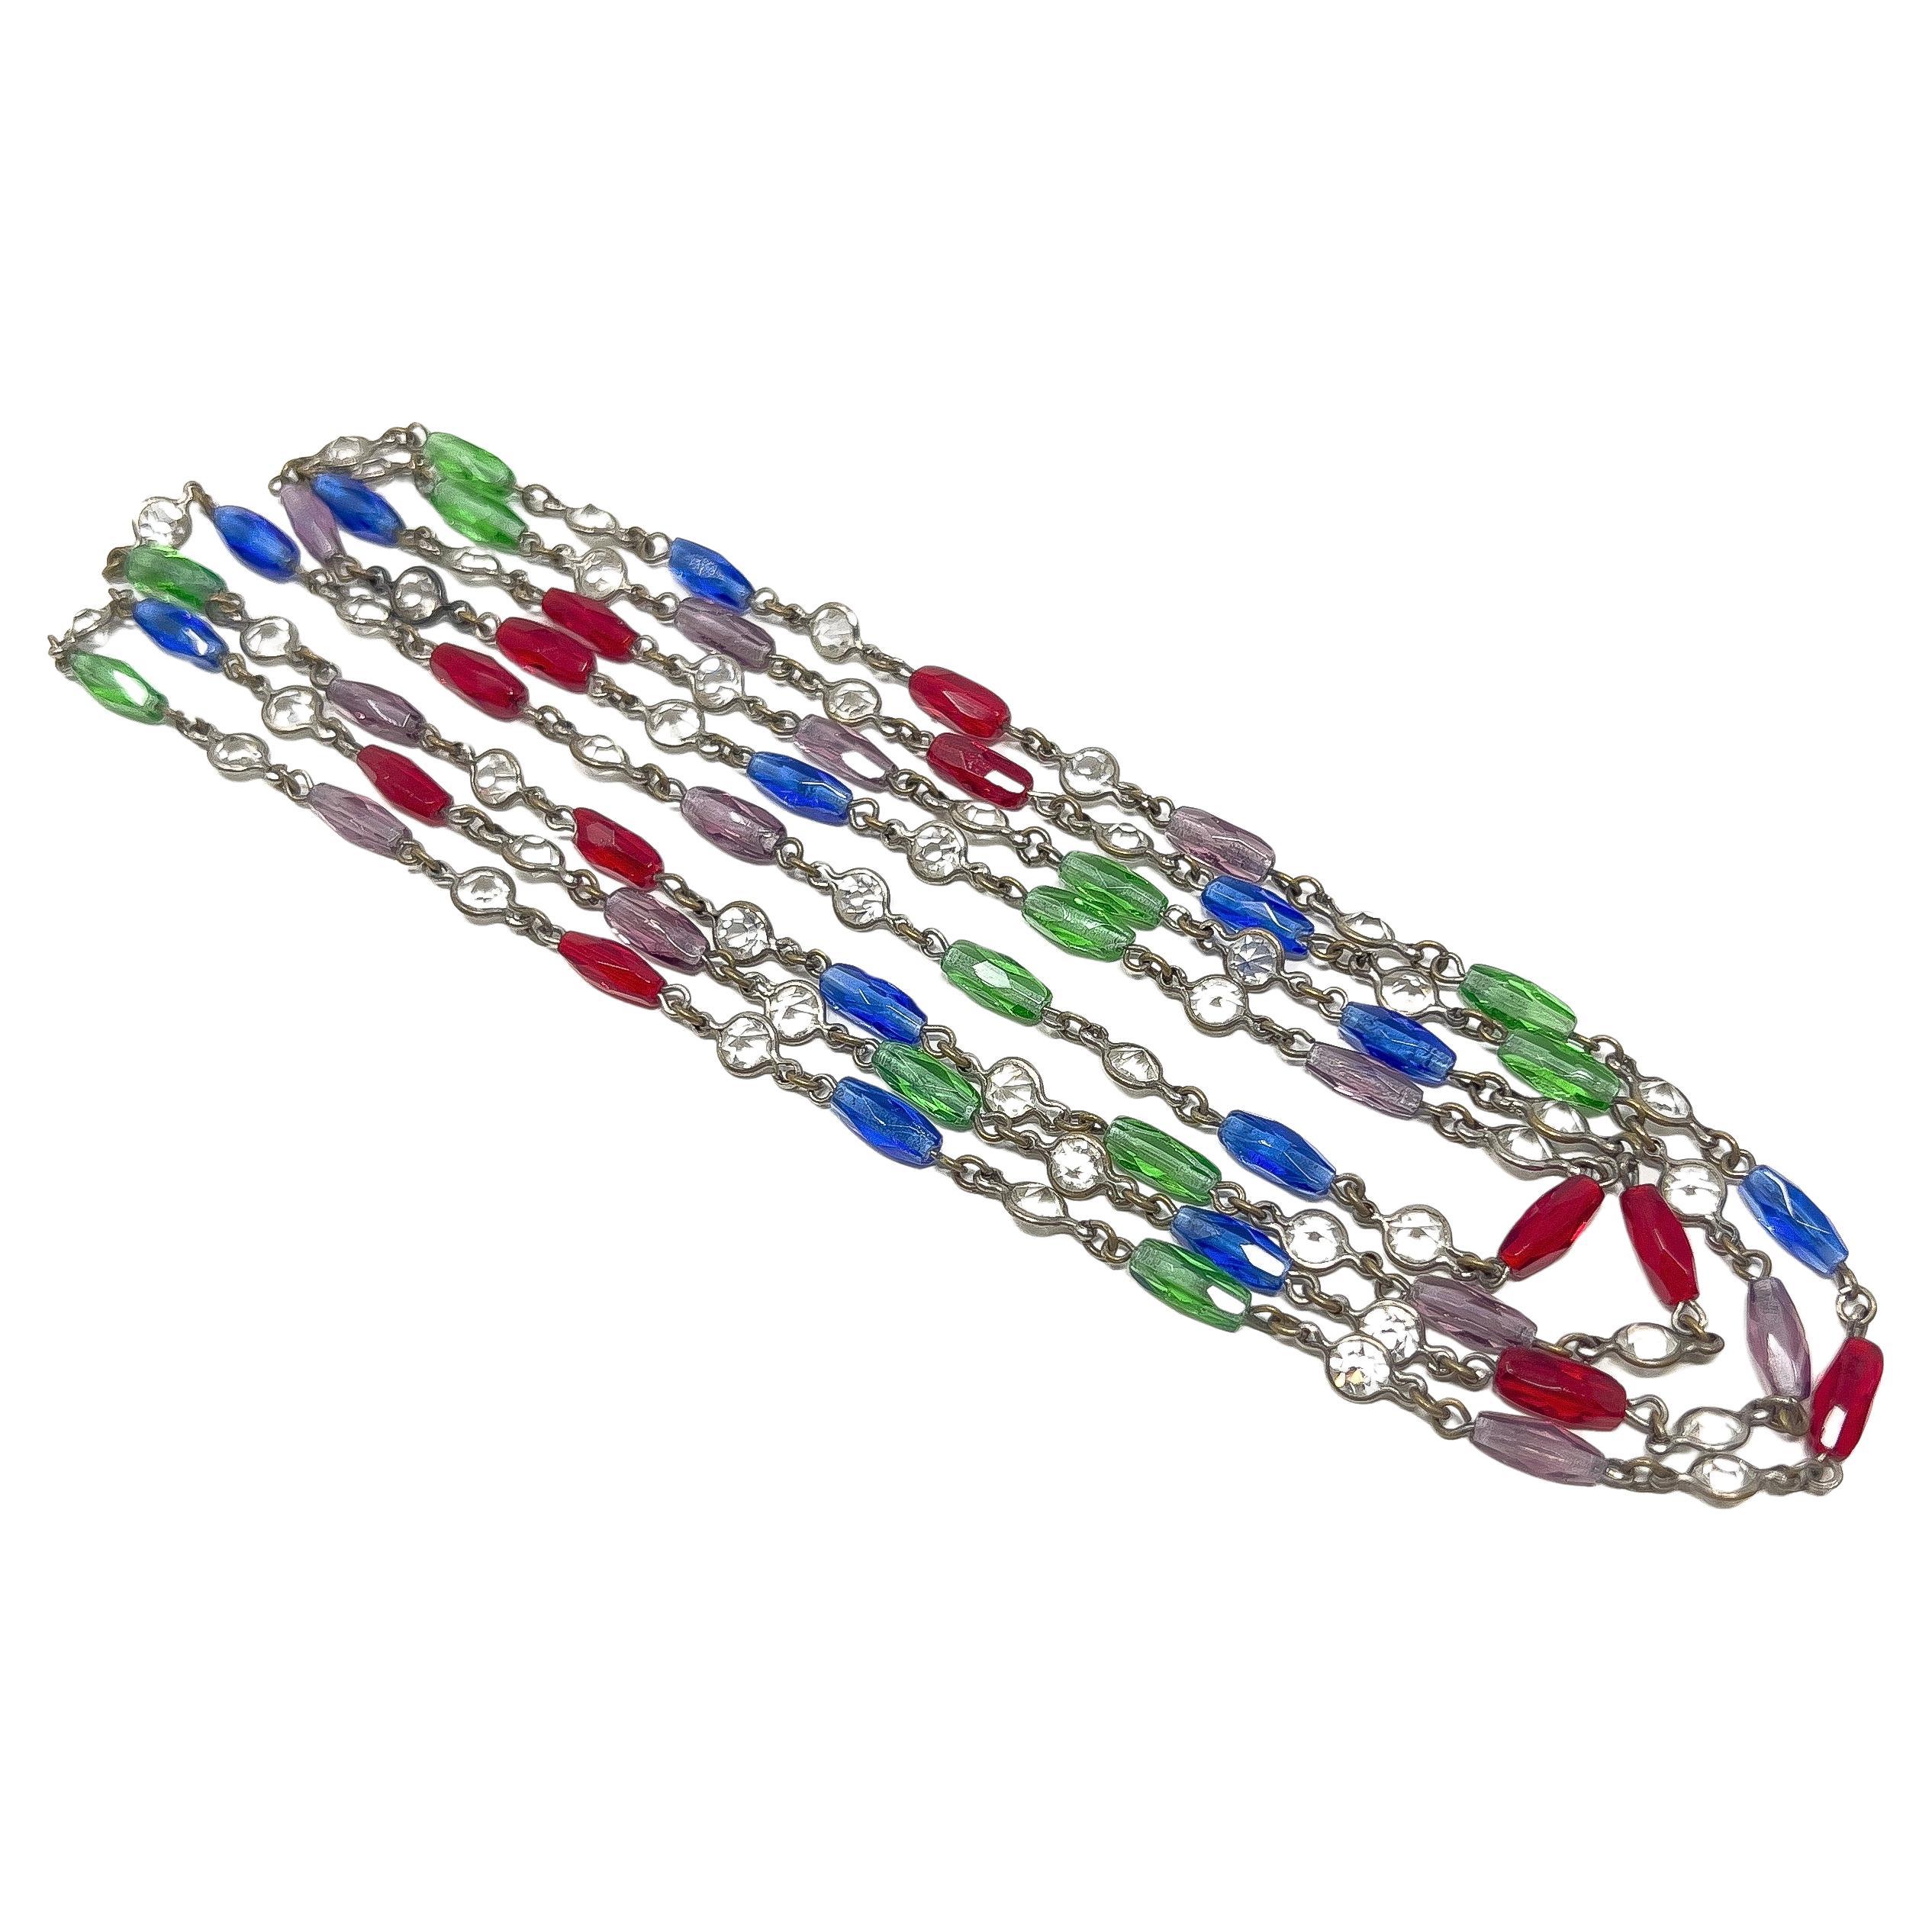 Edwardian c.1900 Crystal and Multi-Coloured Glass Antique Long Guard Chain